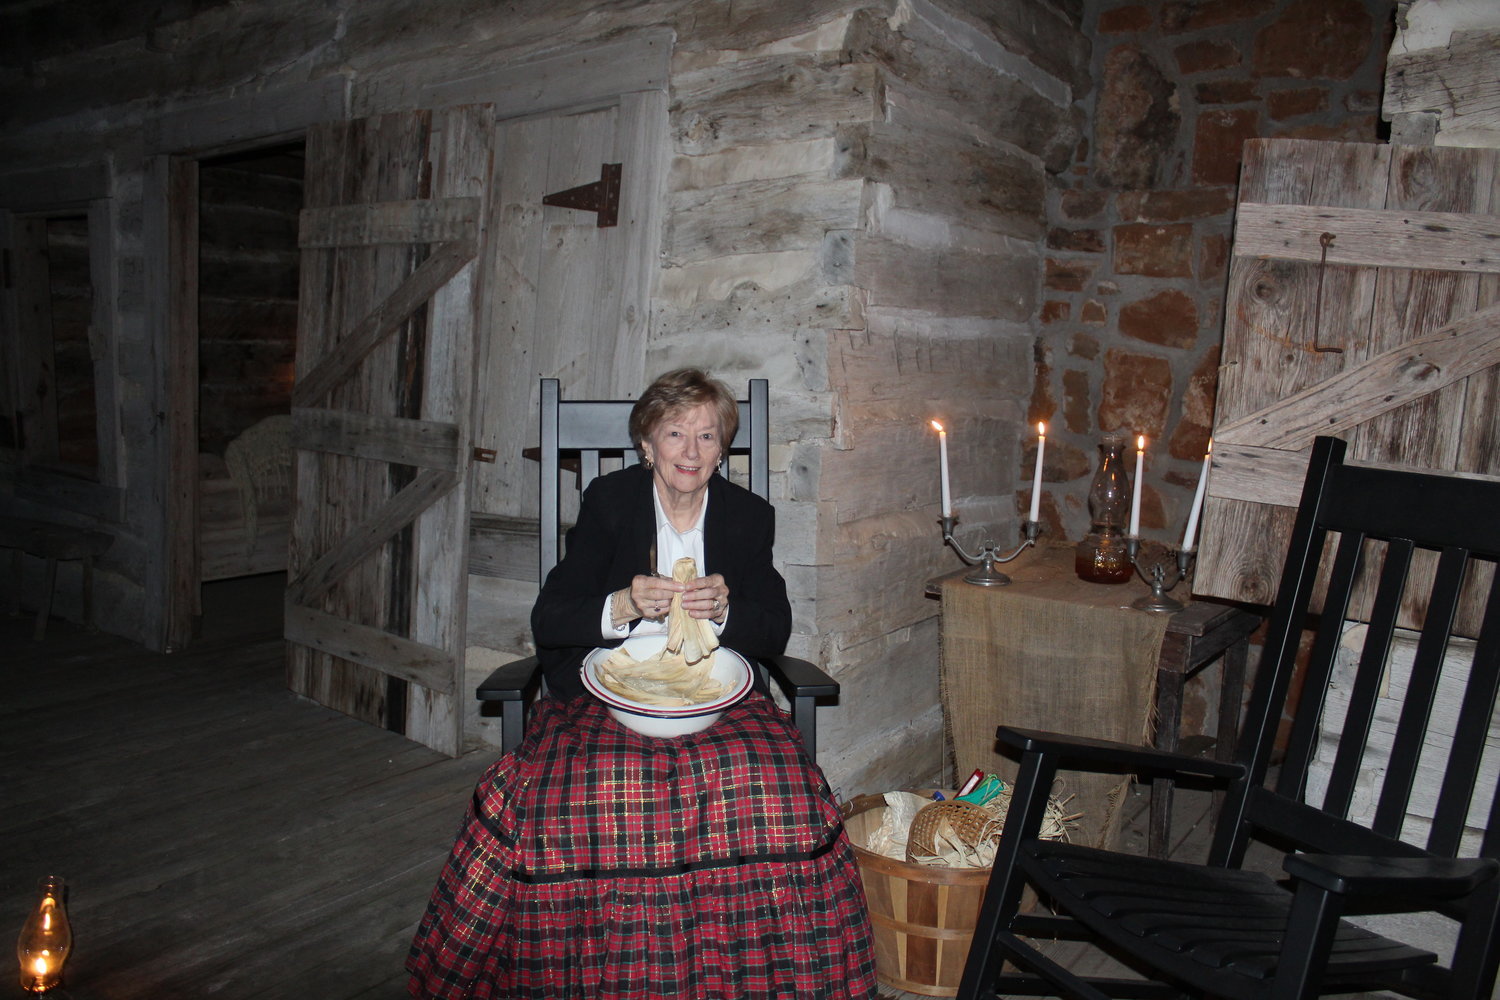 Vicki Frenzel waits to greet visitors to the "Stars in the Village" exhibit at Pioneer Village in 2019. The exhibit returns Saturday, Dec. 4, as well as Friday-Saturday, Dec. 10-11.